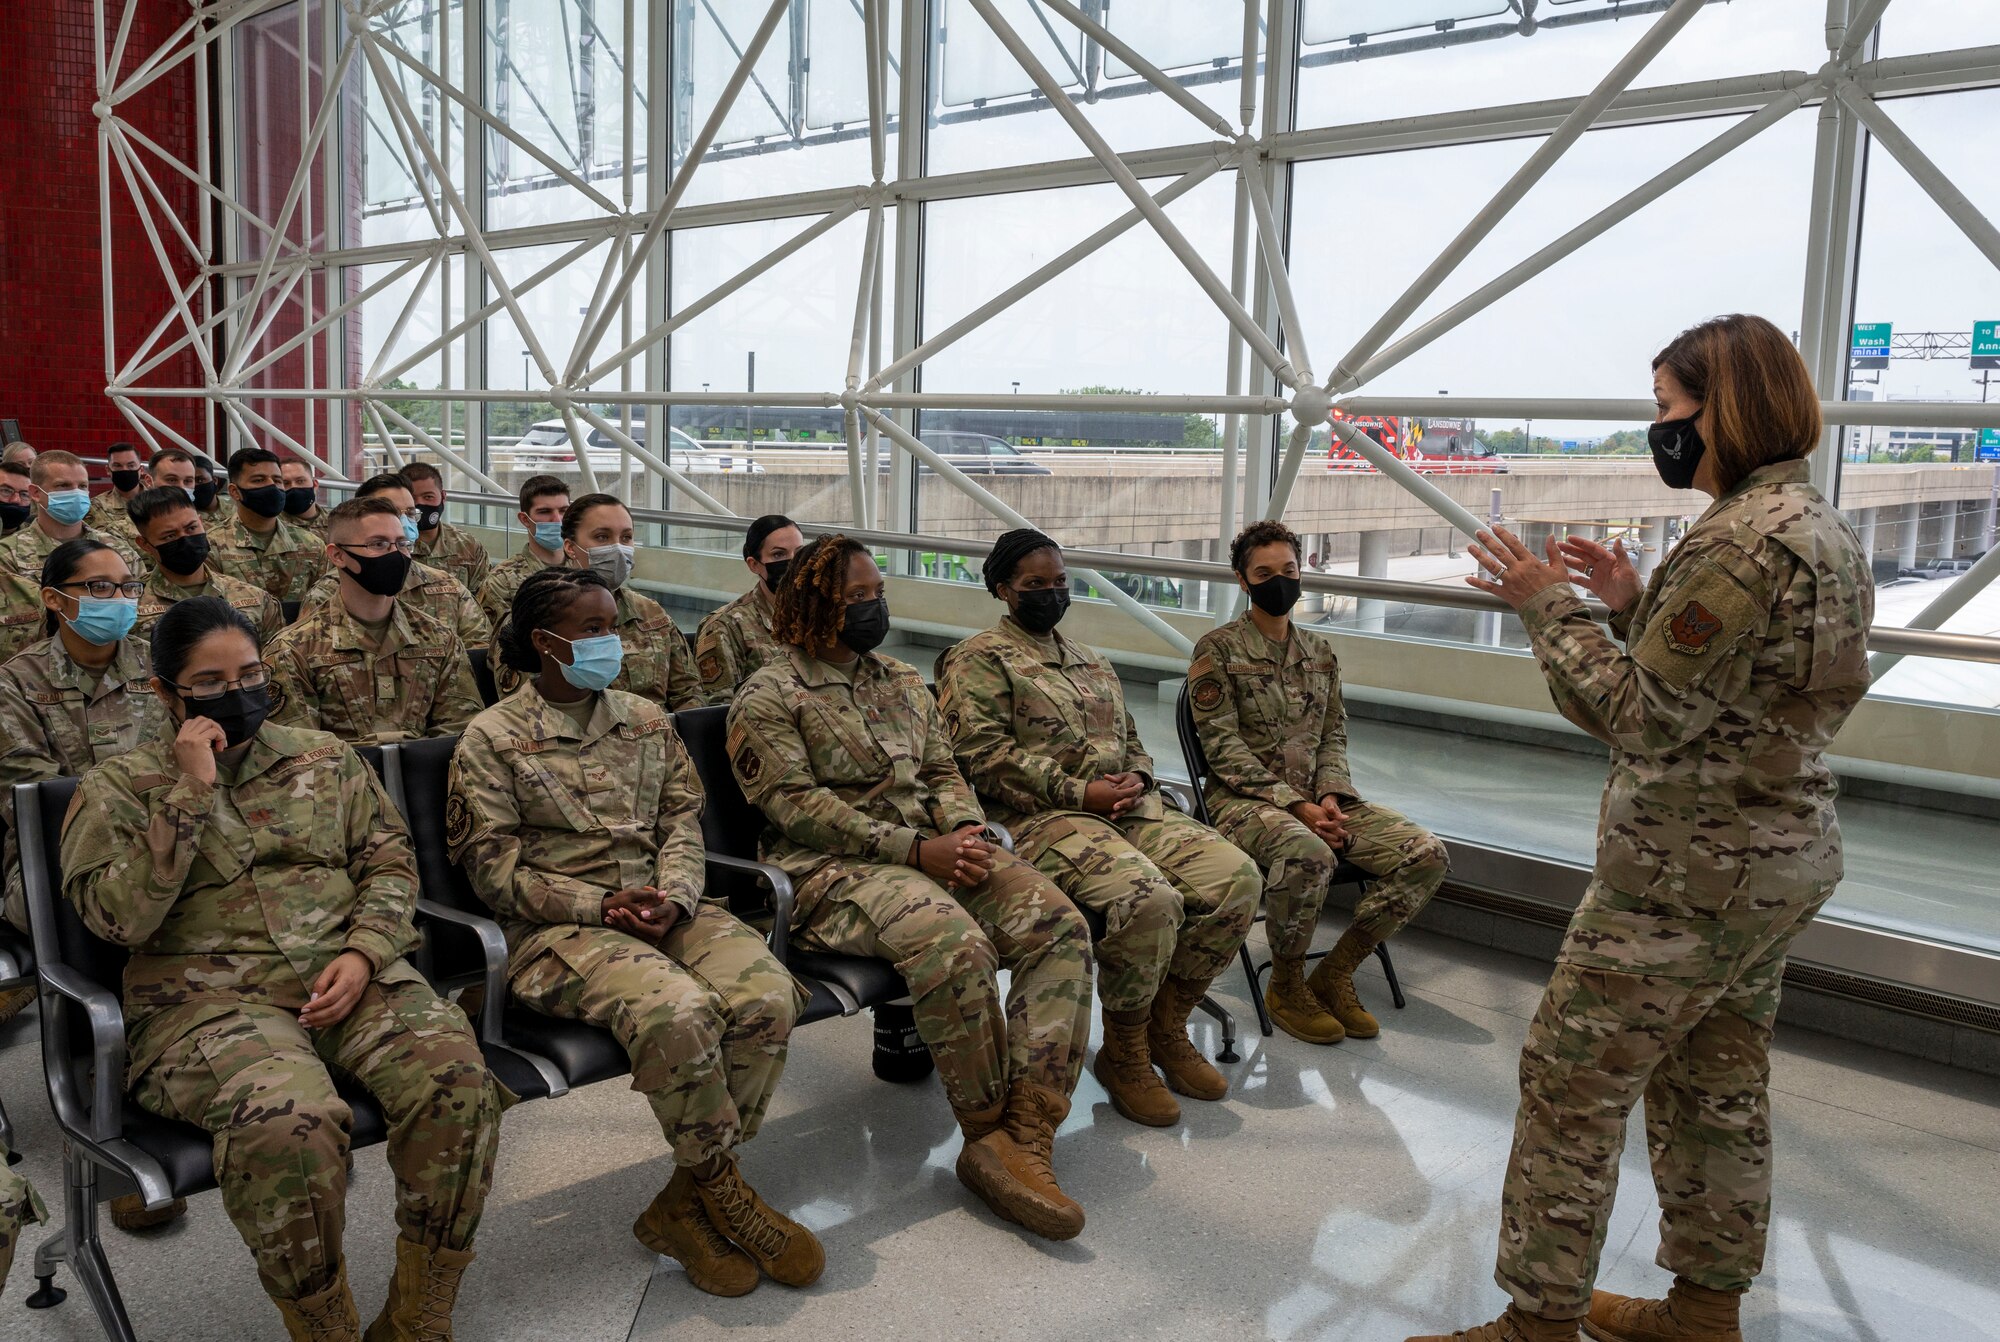 Chief Master Sgt. of the Air Force JoAnne S. Bass speaks with Airmen at the Patriot Express COVID-19 testing facility in the Baltimore/Washington International Thurgood Marshall Airport in Baltimore, July 8, 2021. Over 22,000 rapid, on-site, COVID-19 tests were administered by Air Force medical professionals deployed to Air Mobility Command aerial ports of embarkation. Due to the increased availability in COVID-19 testing centers and vaccines, testing at the BWI facility is scheduled to discontinue July 15, 2021. (U.S. Air Force photo by Airman 1st Class Cydney Lee)